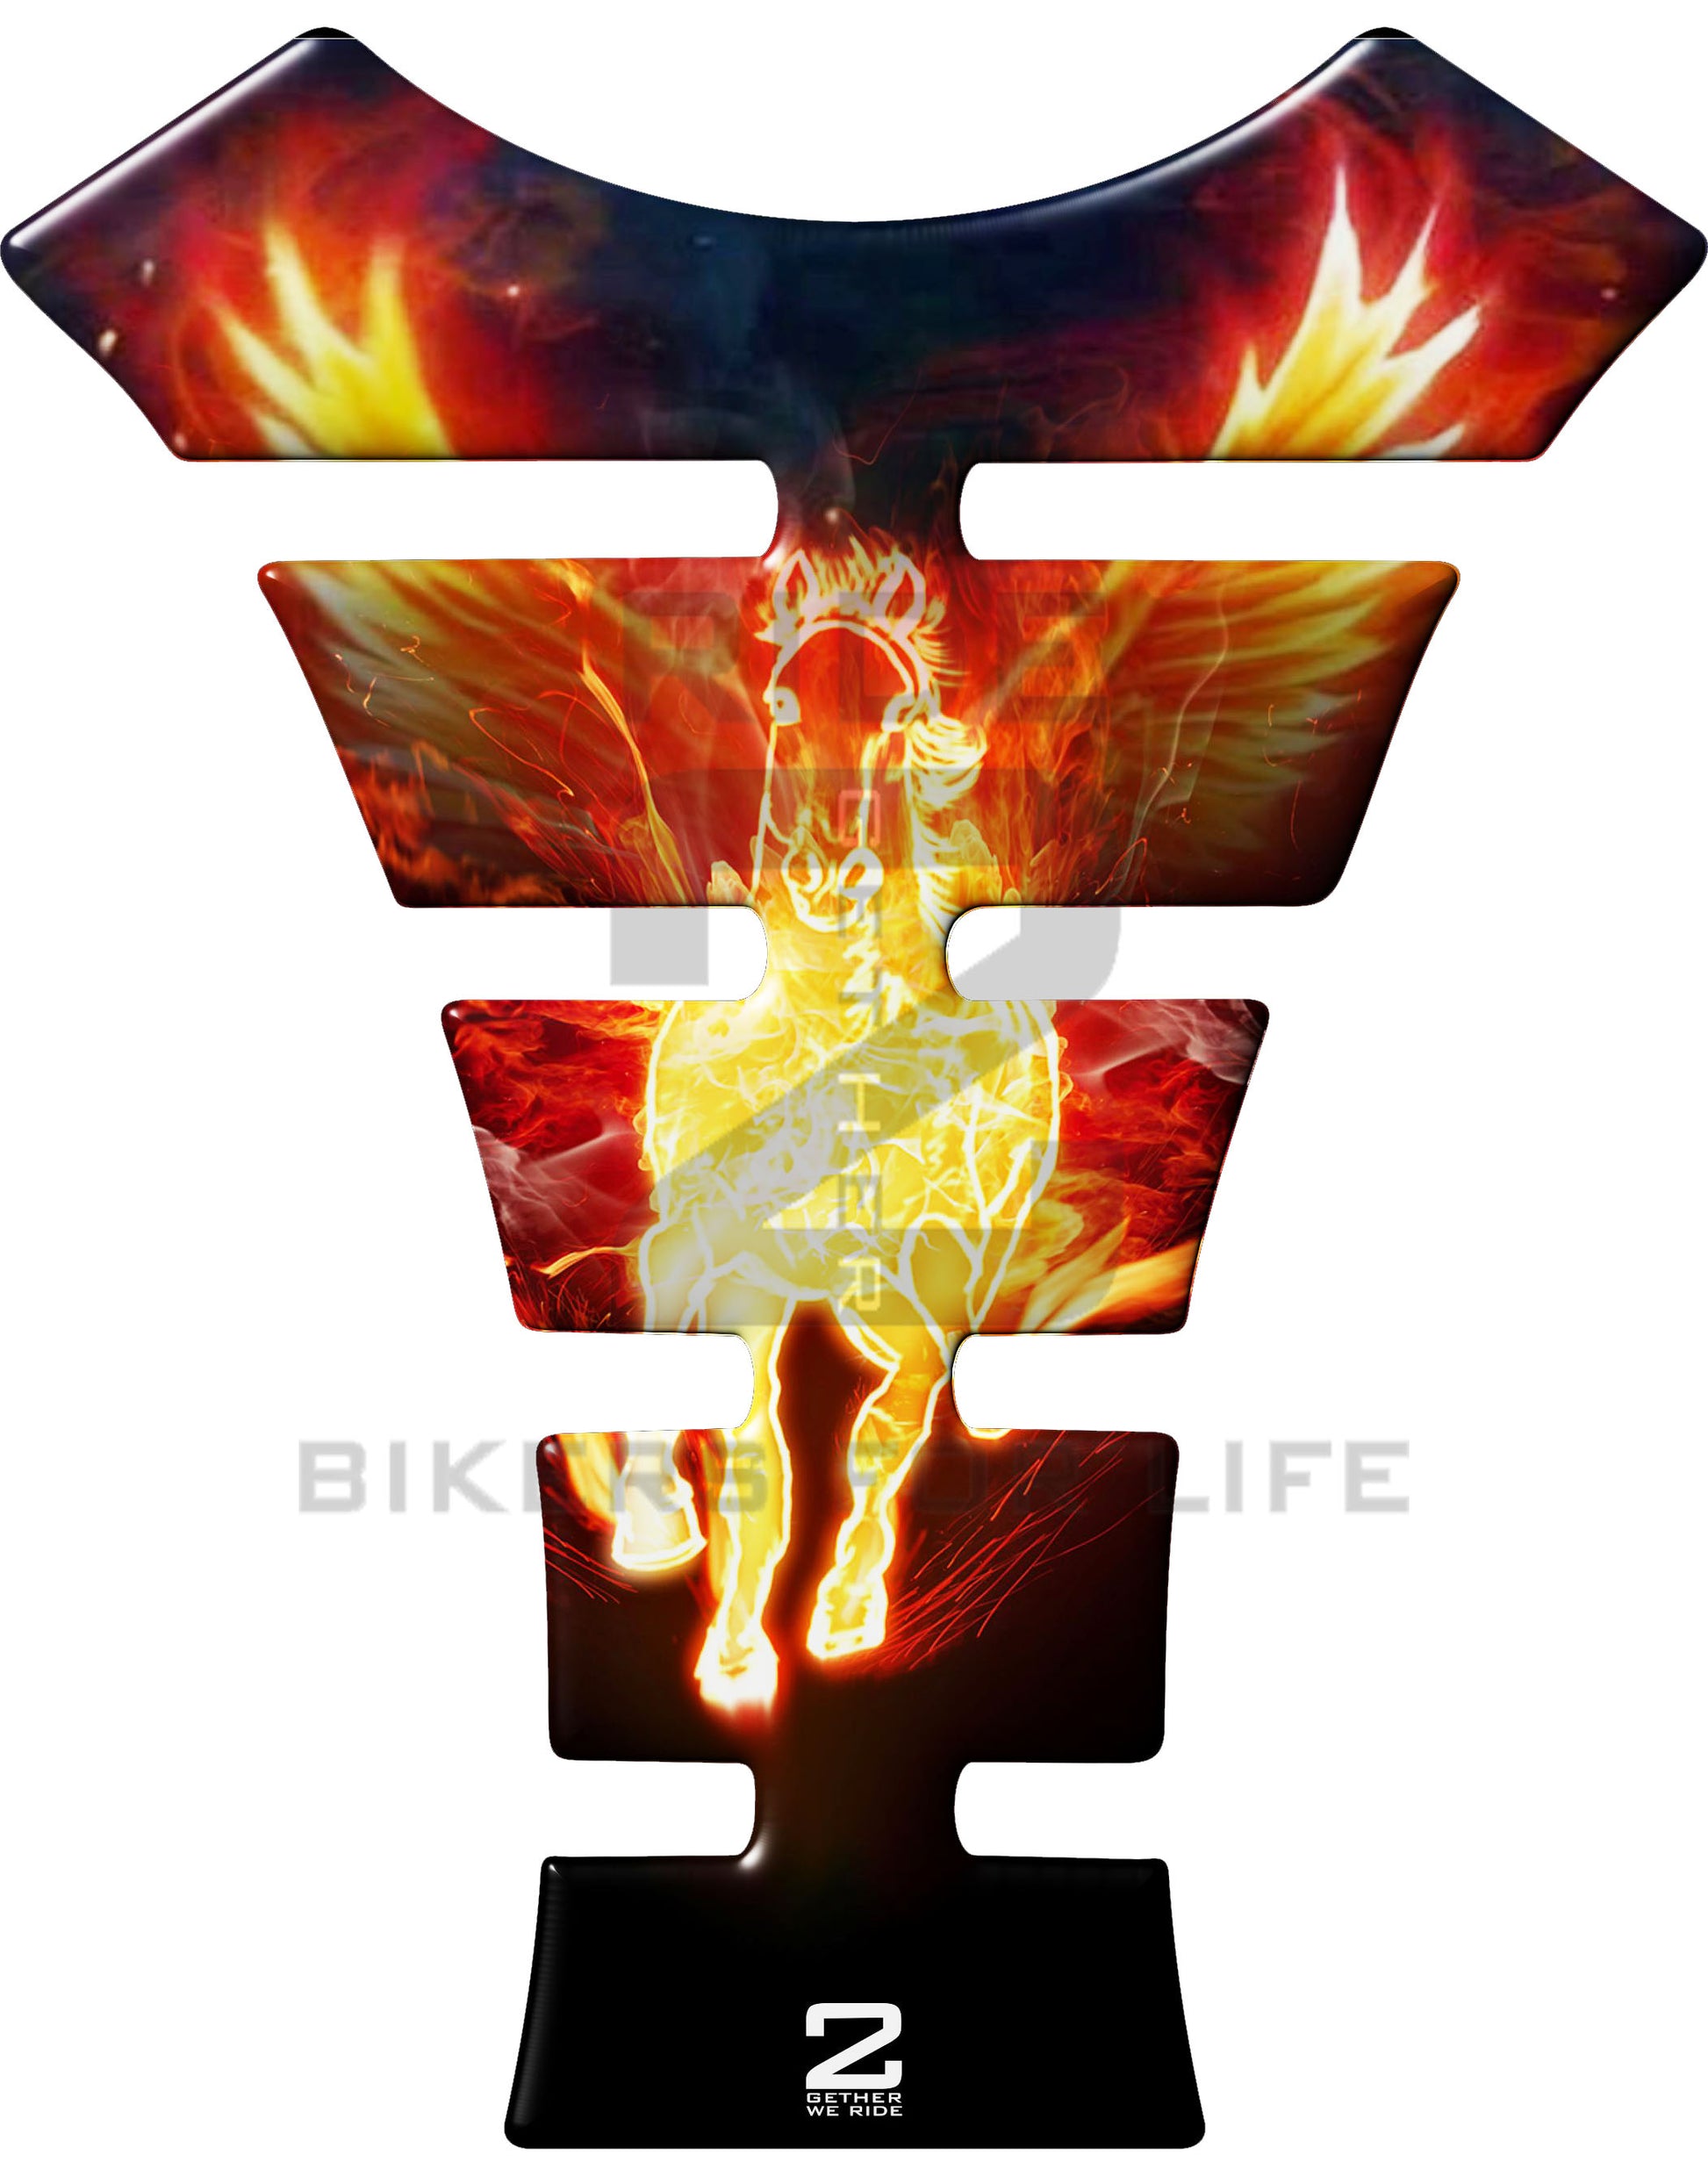 Motor Bike Tank Pad Protector. Fiery Flaming Horse. A Street Pad which fits most motorcycles.